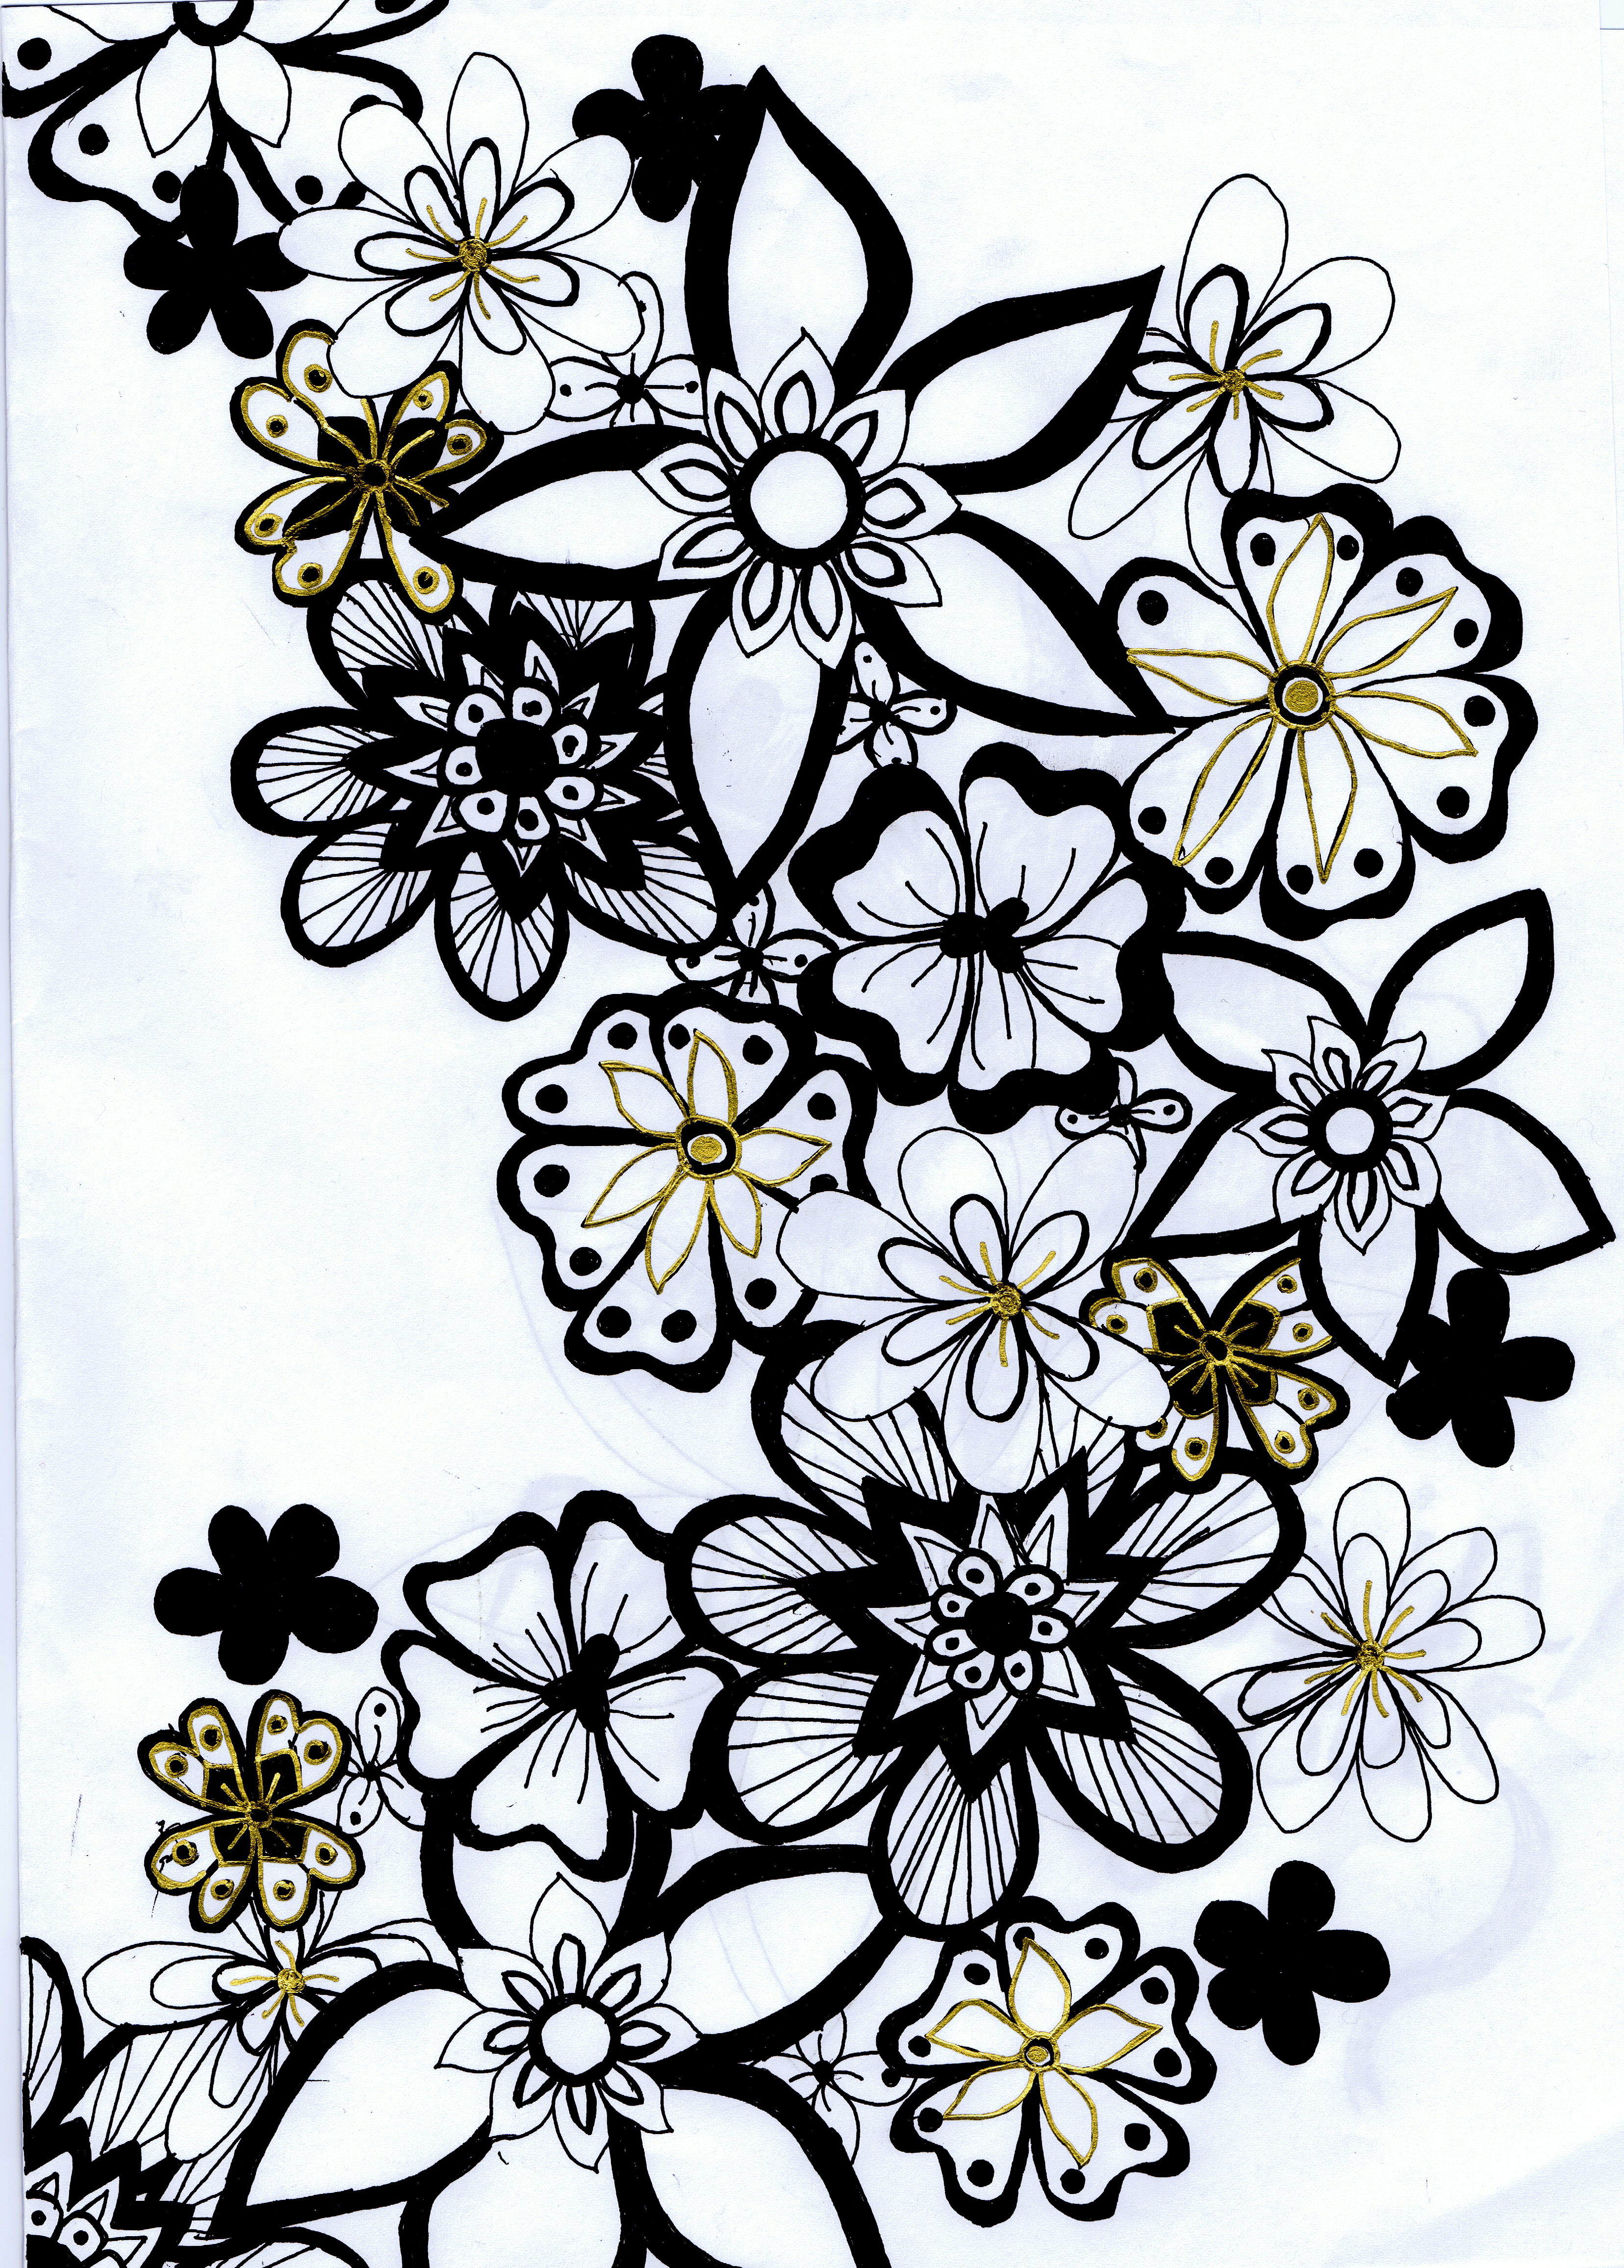 Flower Black And White Drawing Background 1 HD Wallpapers | lzamgs.